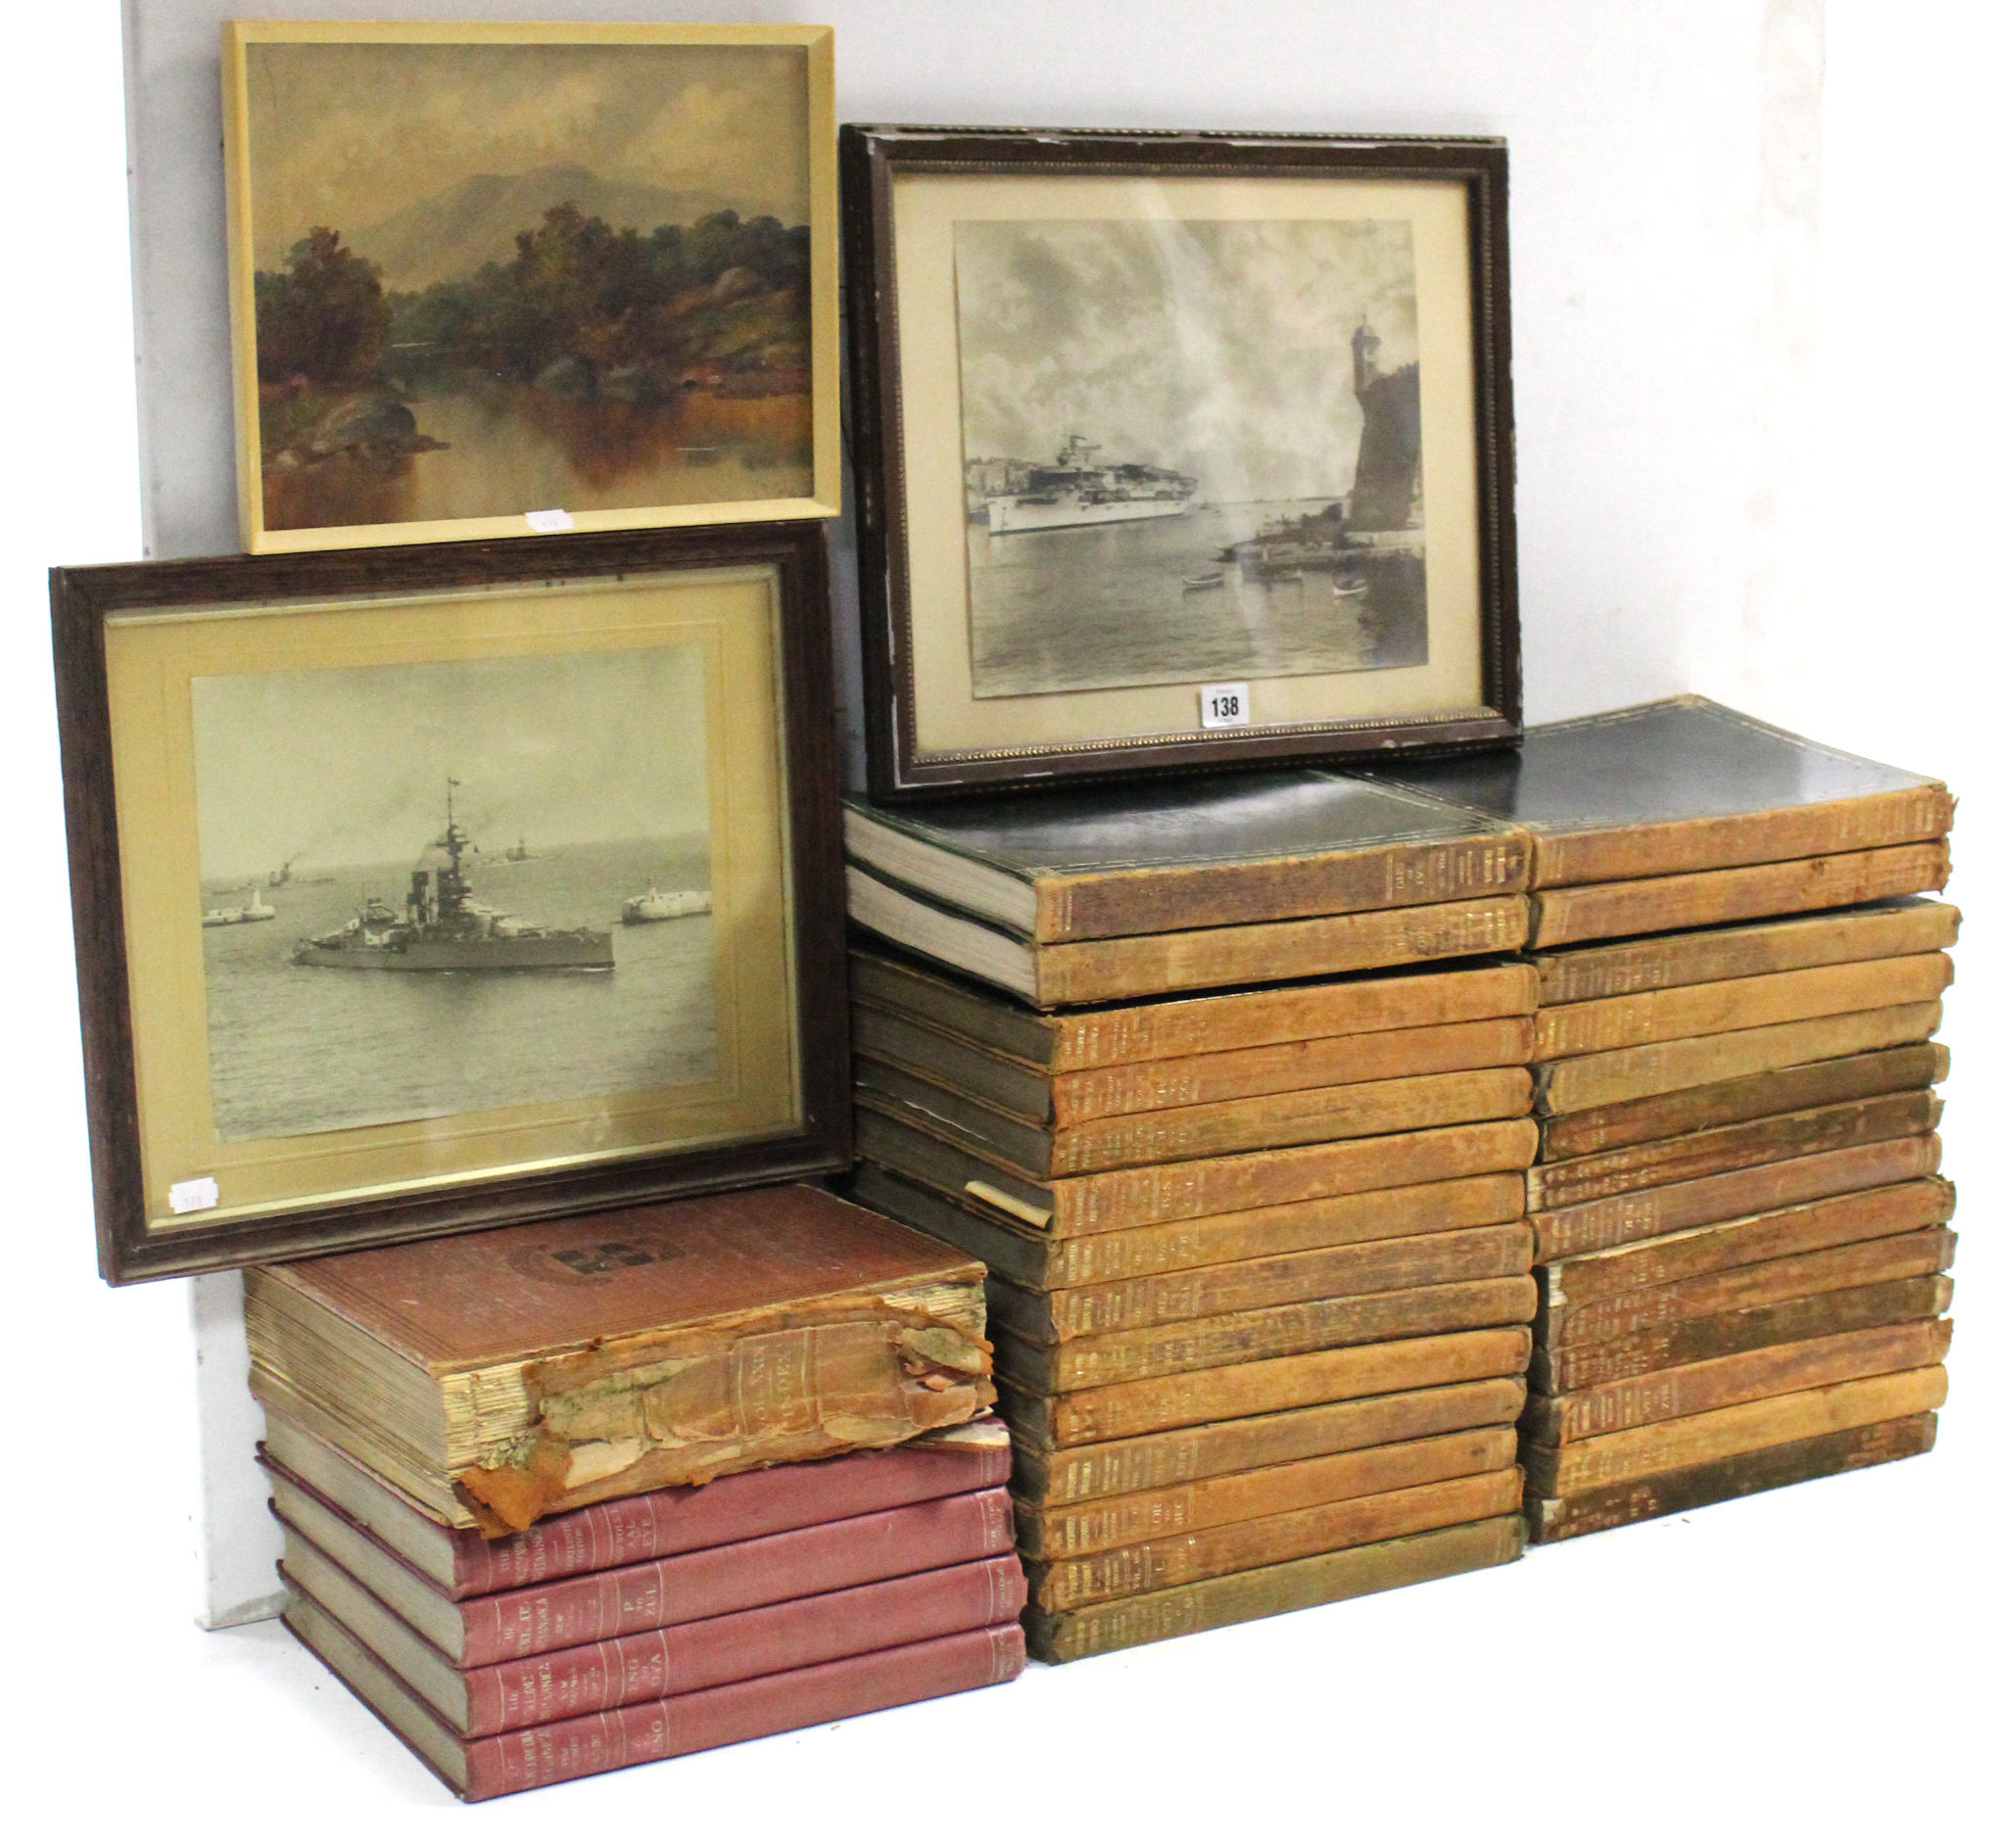 Two sepia naval photographs; a small oil painting on board titled to reverse “In the Vale of Clywd”,